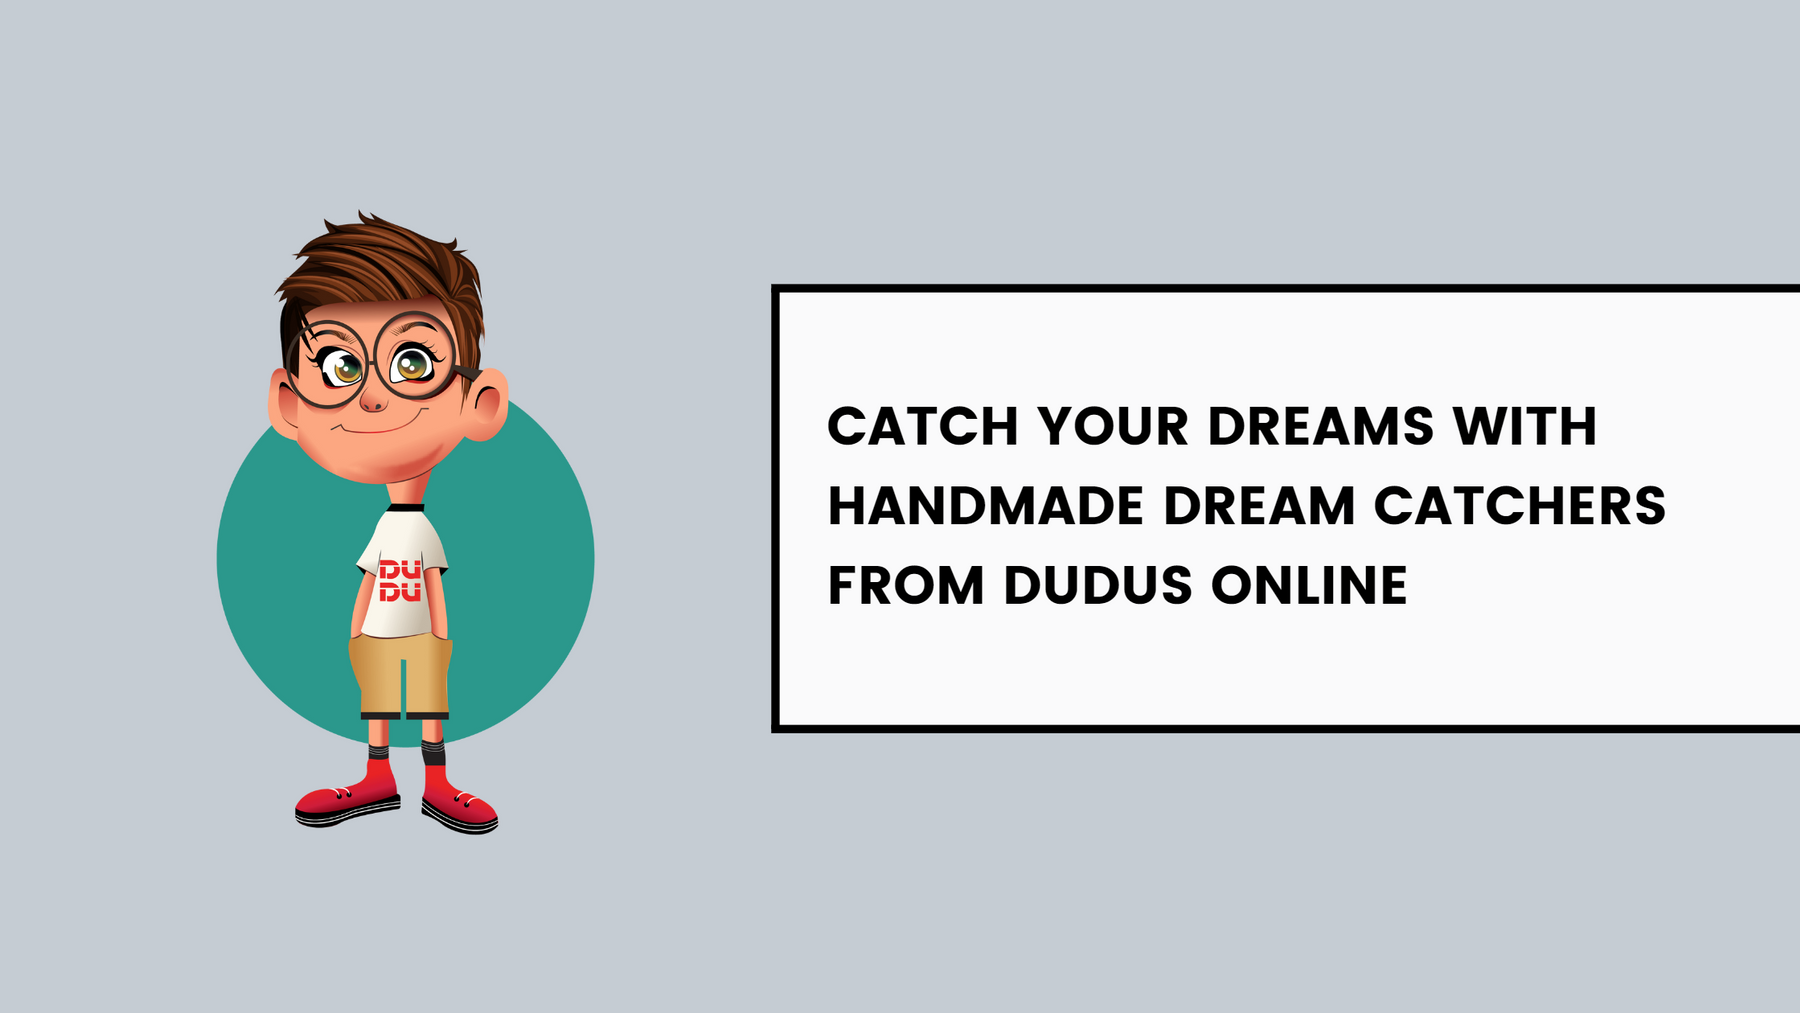 Catch Your Dreams With Handmade Dream Catchers From Dudus Online